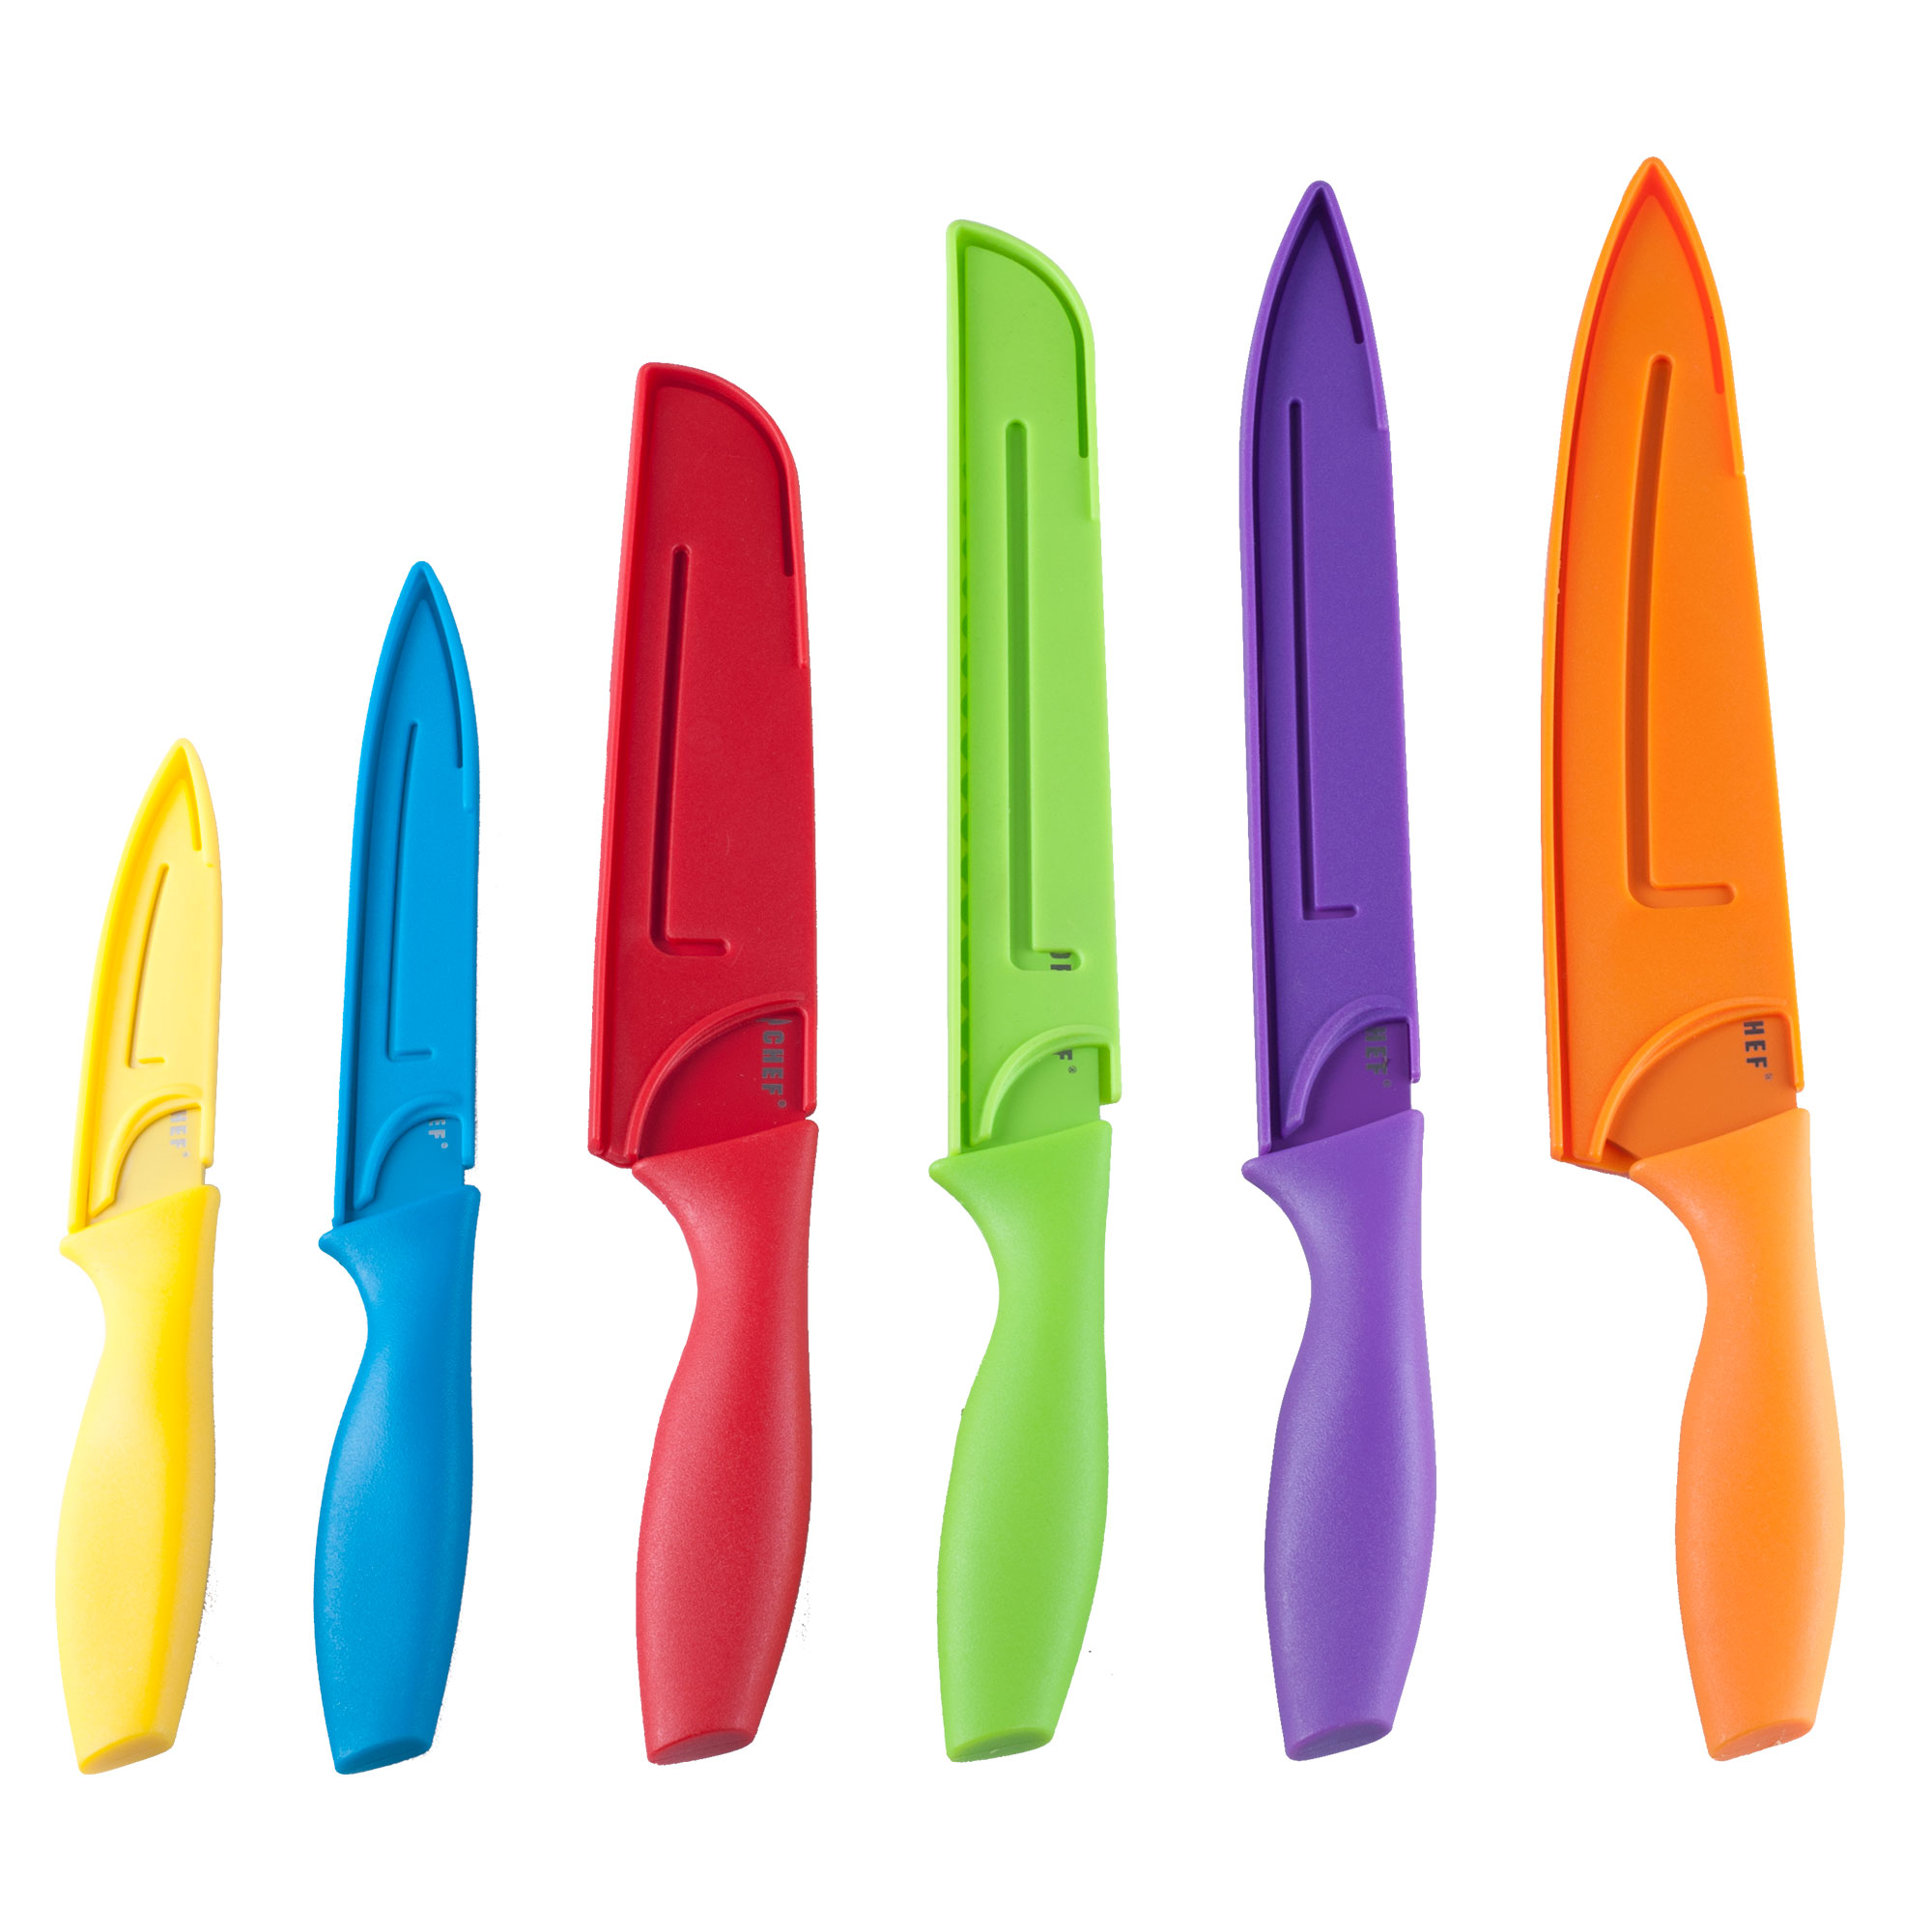 Top Chef 6-Piece Colored Knife Set, Professional Grade - image 2 of 4